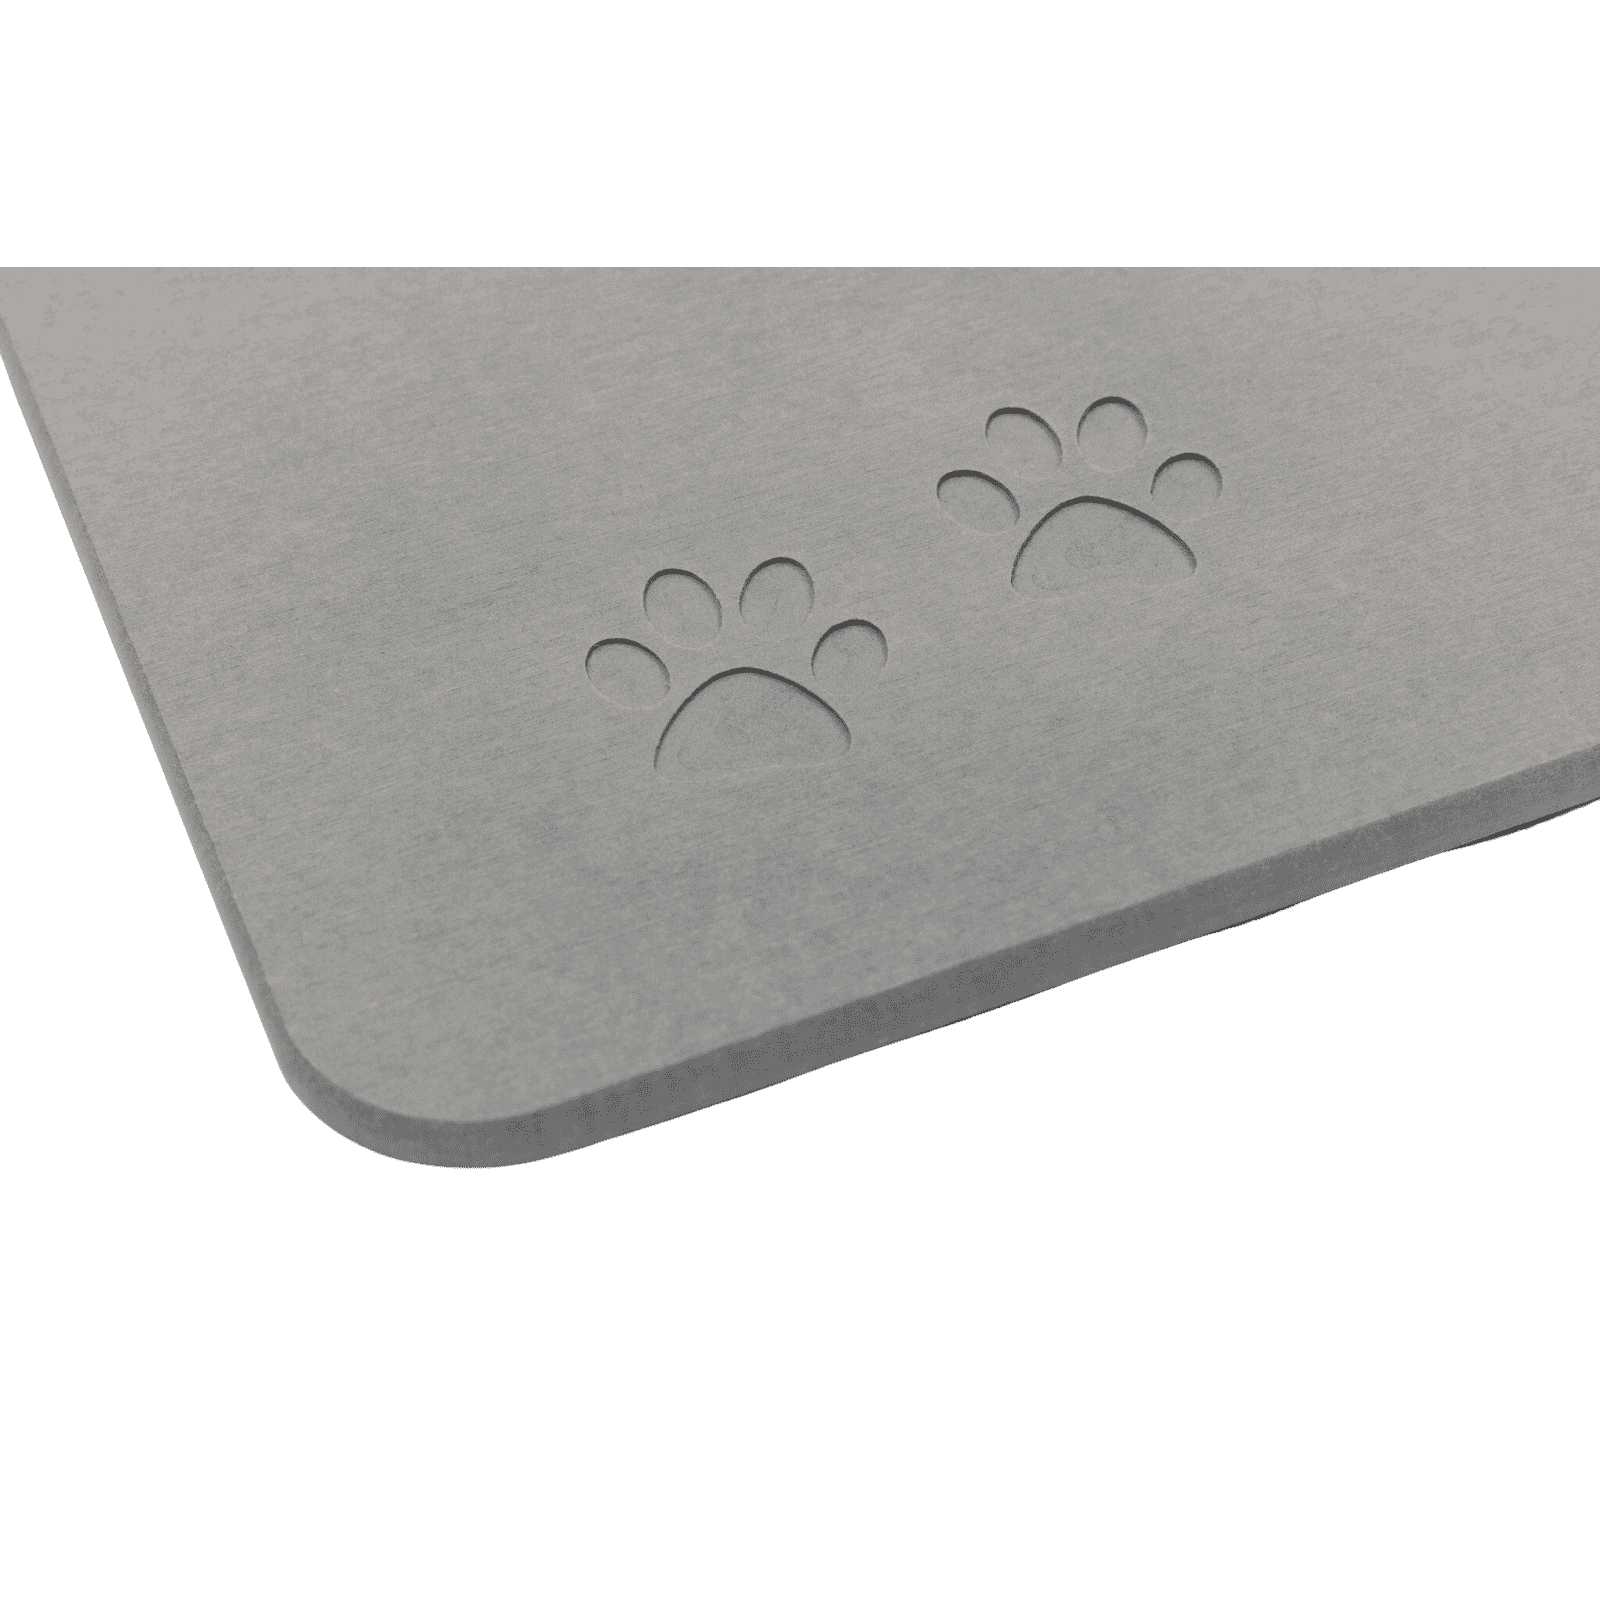 12 X 19 in Absorbent Pet Feeding Mat, Quick Dog Mat for Food and Water  Bowl, No Stains Easy Clean Dog Food Mats for Floors, Dry Dog Water Bowl Mat  for